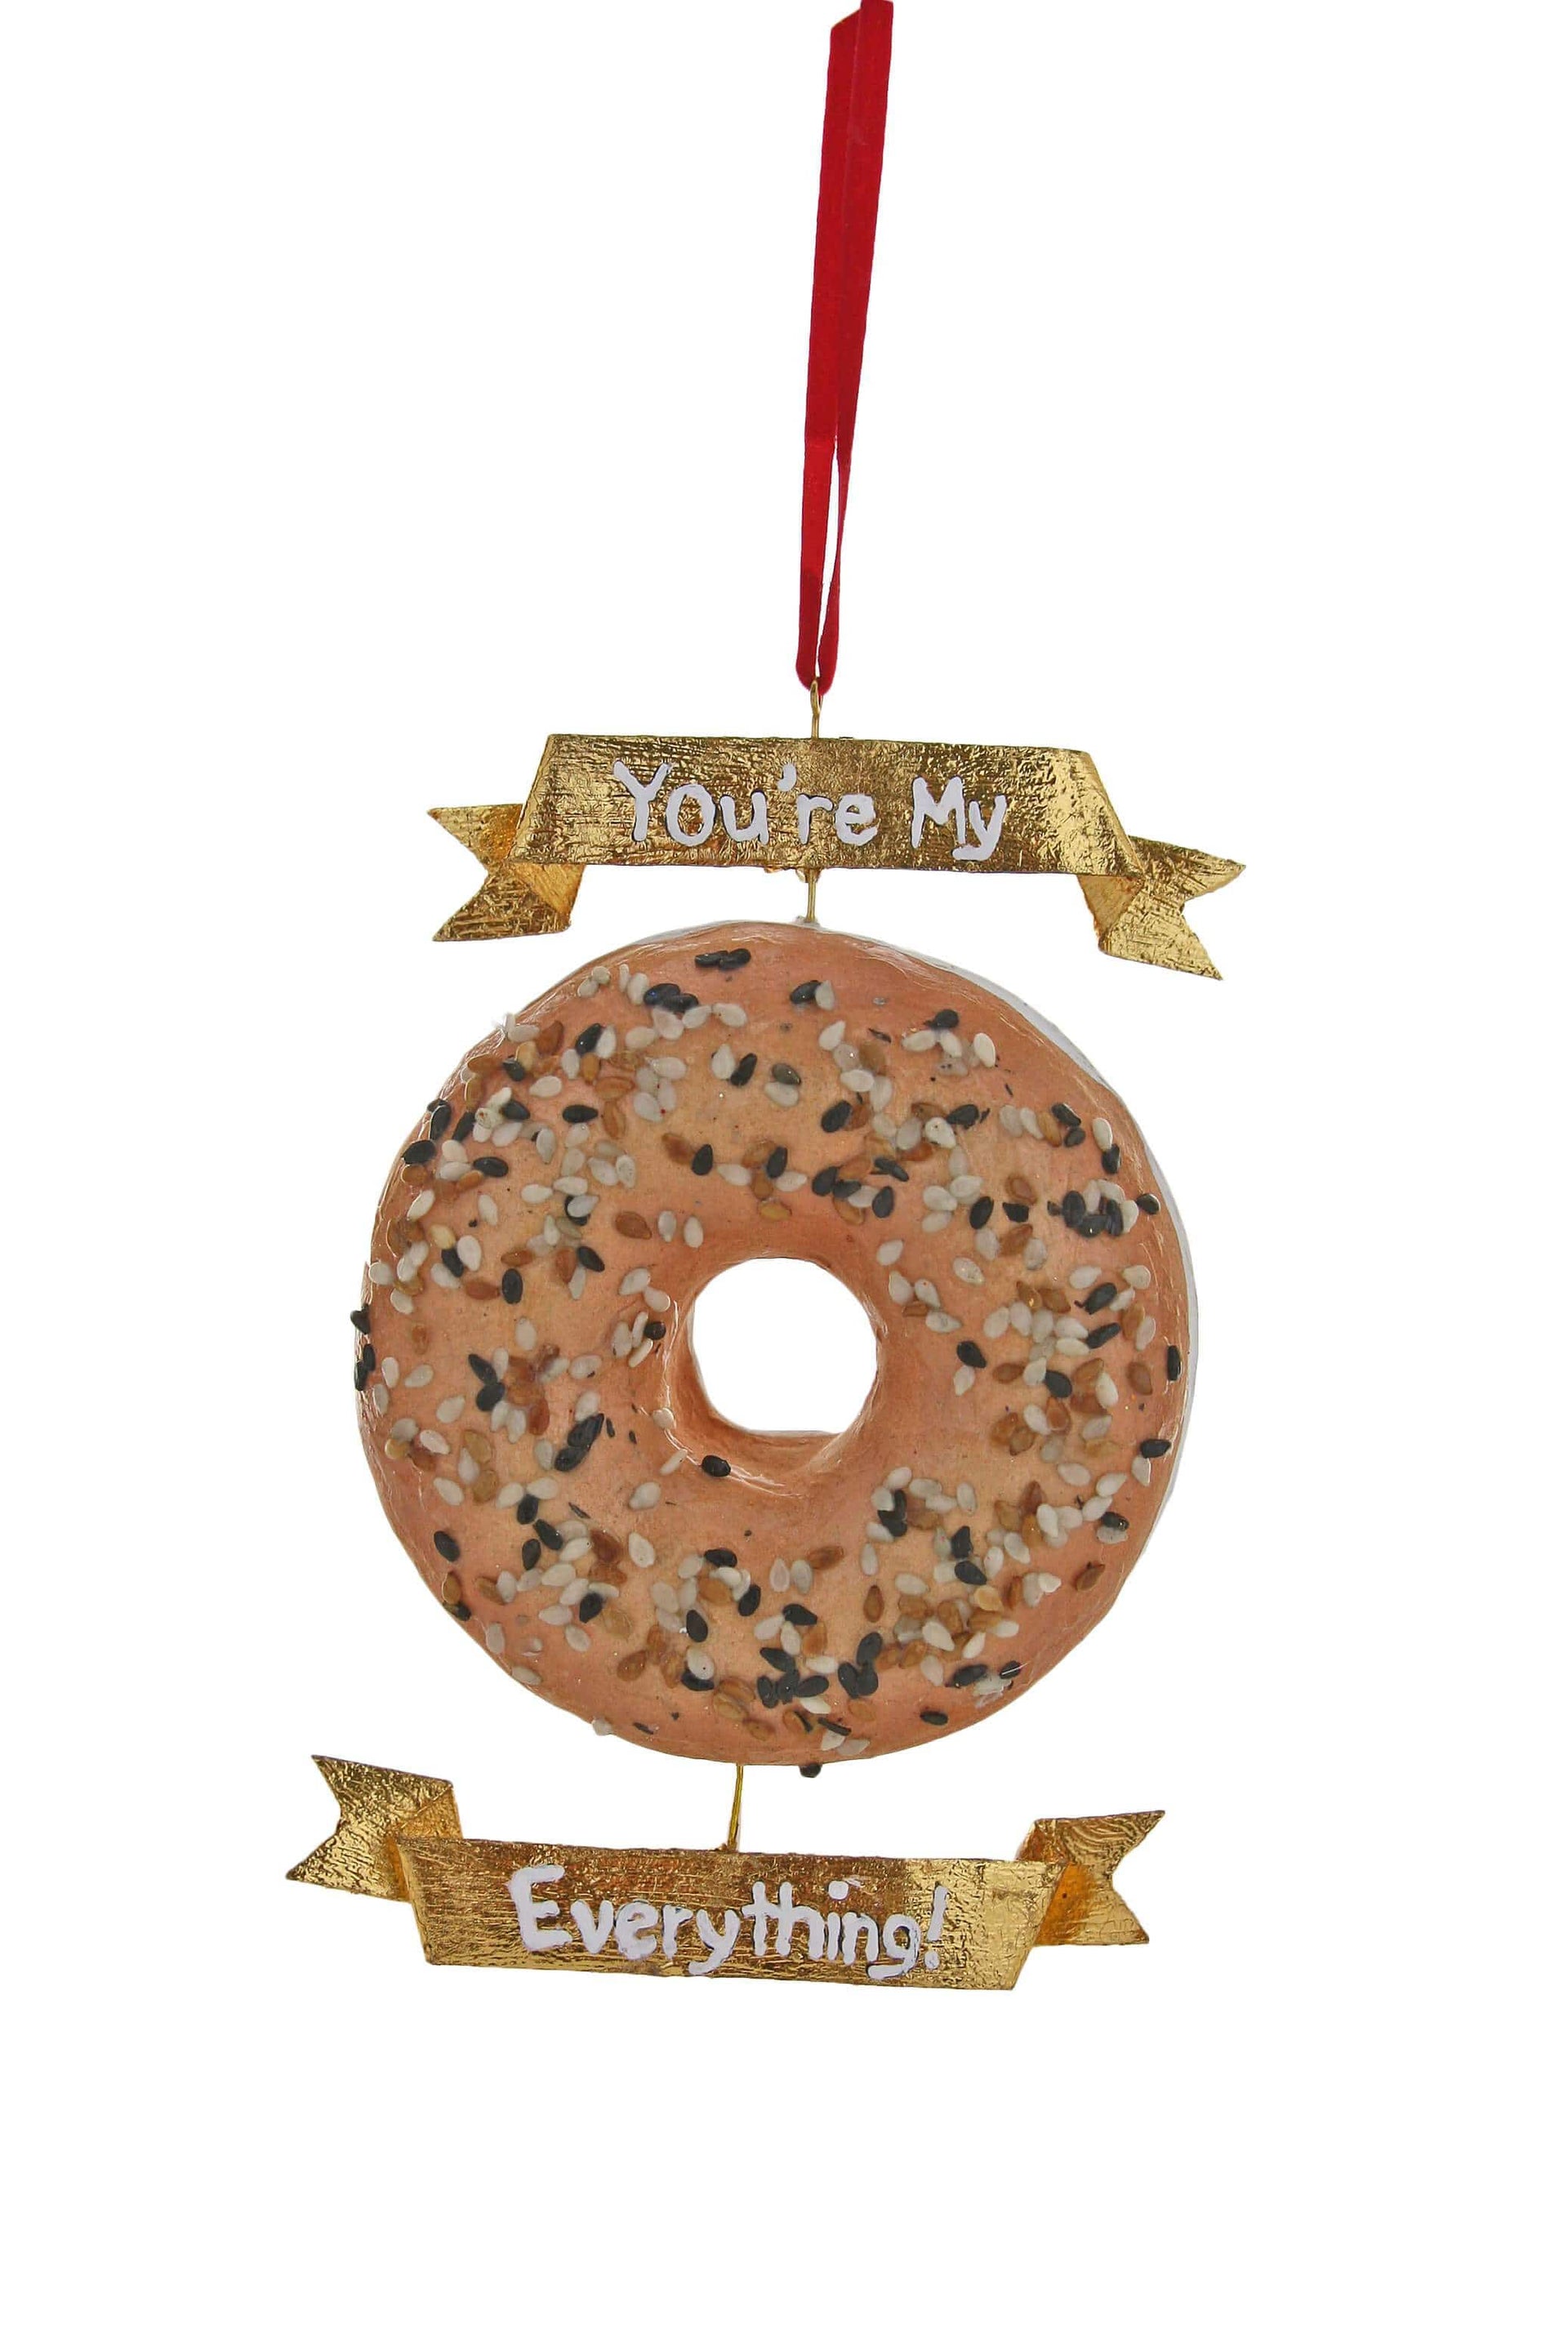 Cody Foster Ornaments You're My Everything Bagel Ornament by Cody Foster